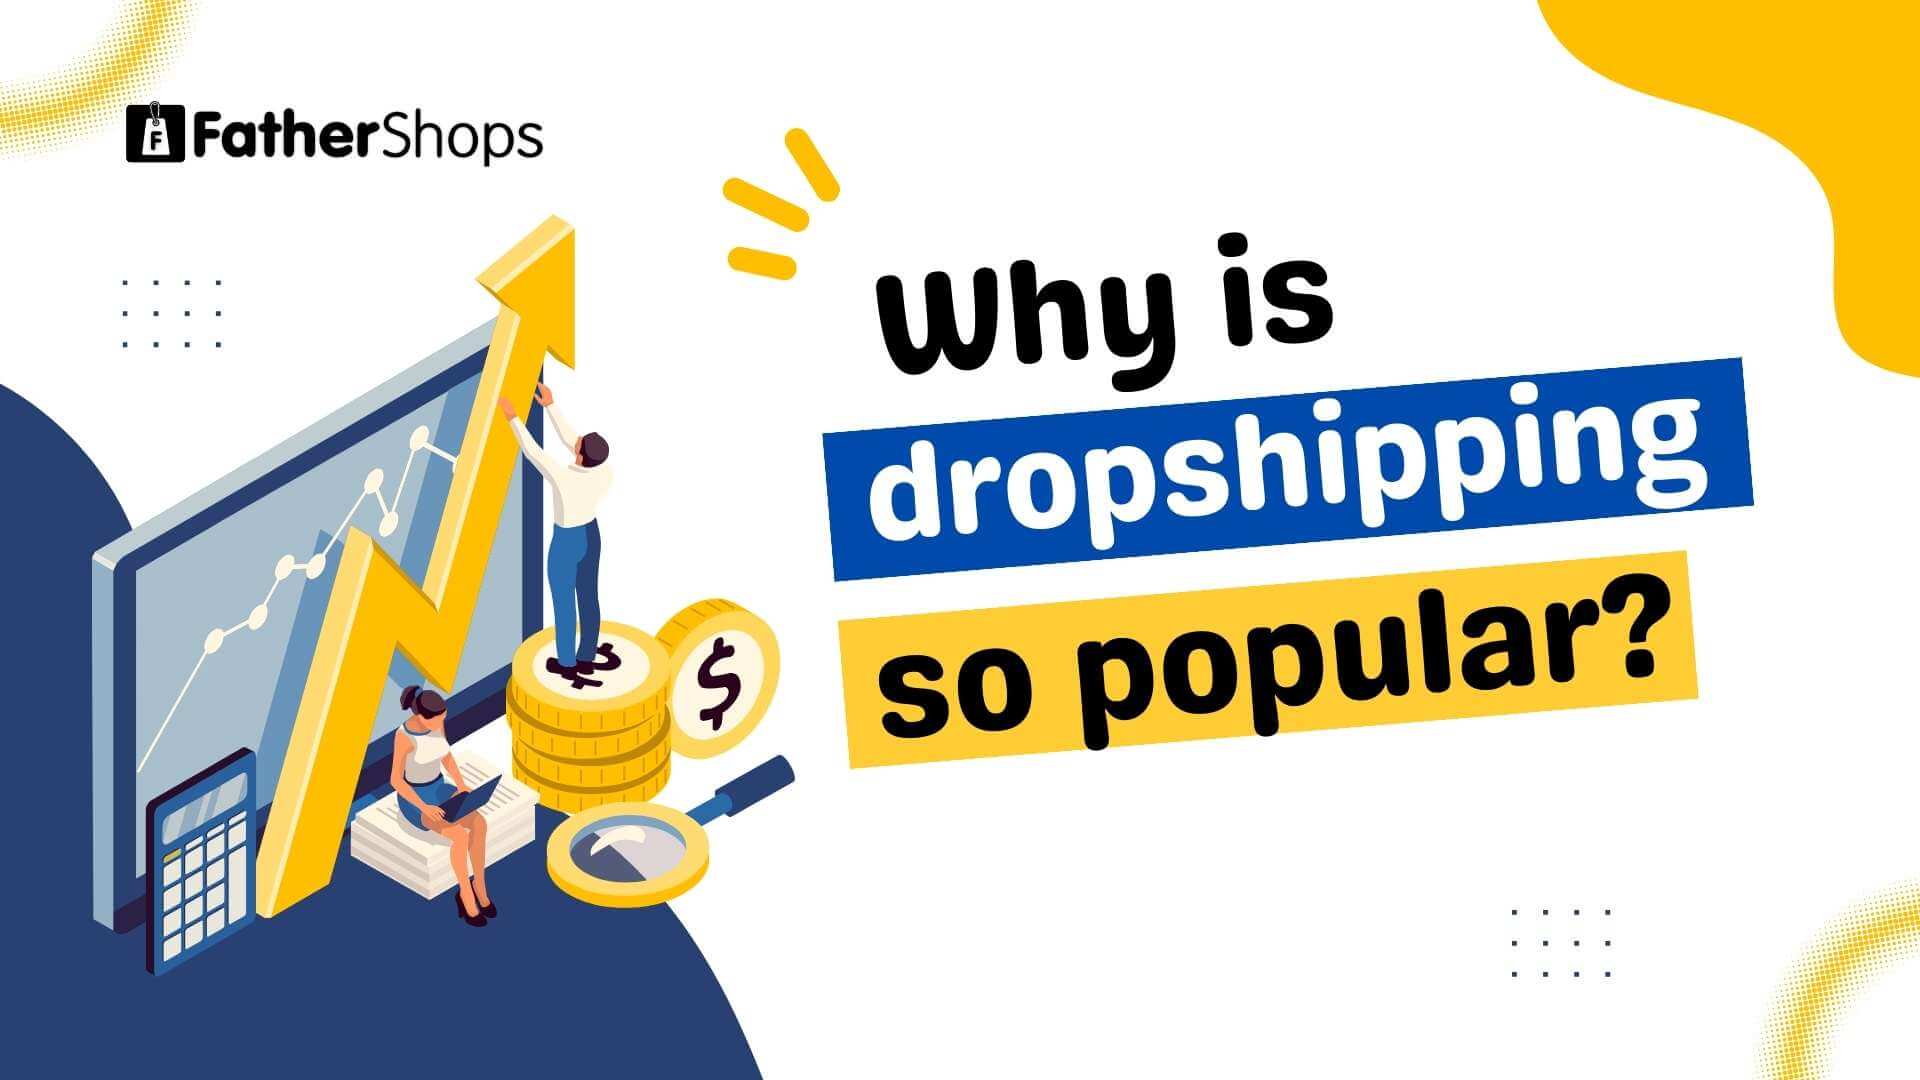 Is Dropshipping Worth It?